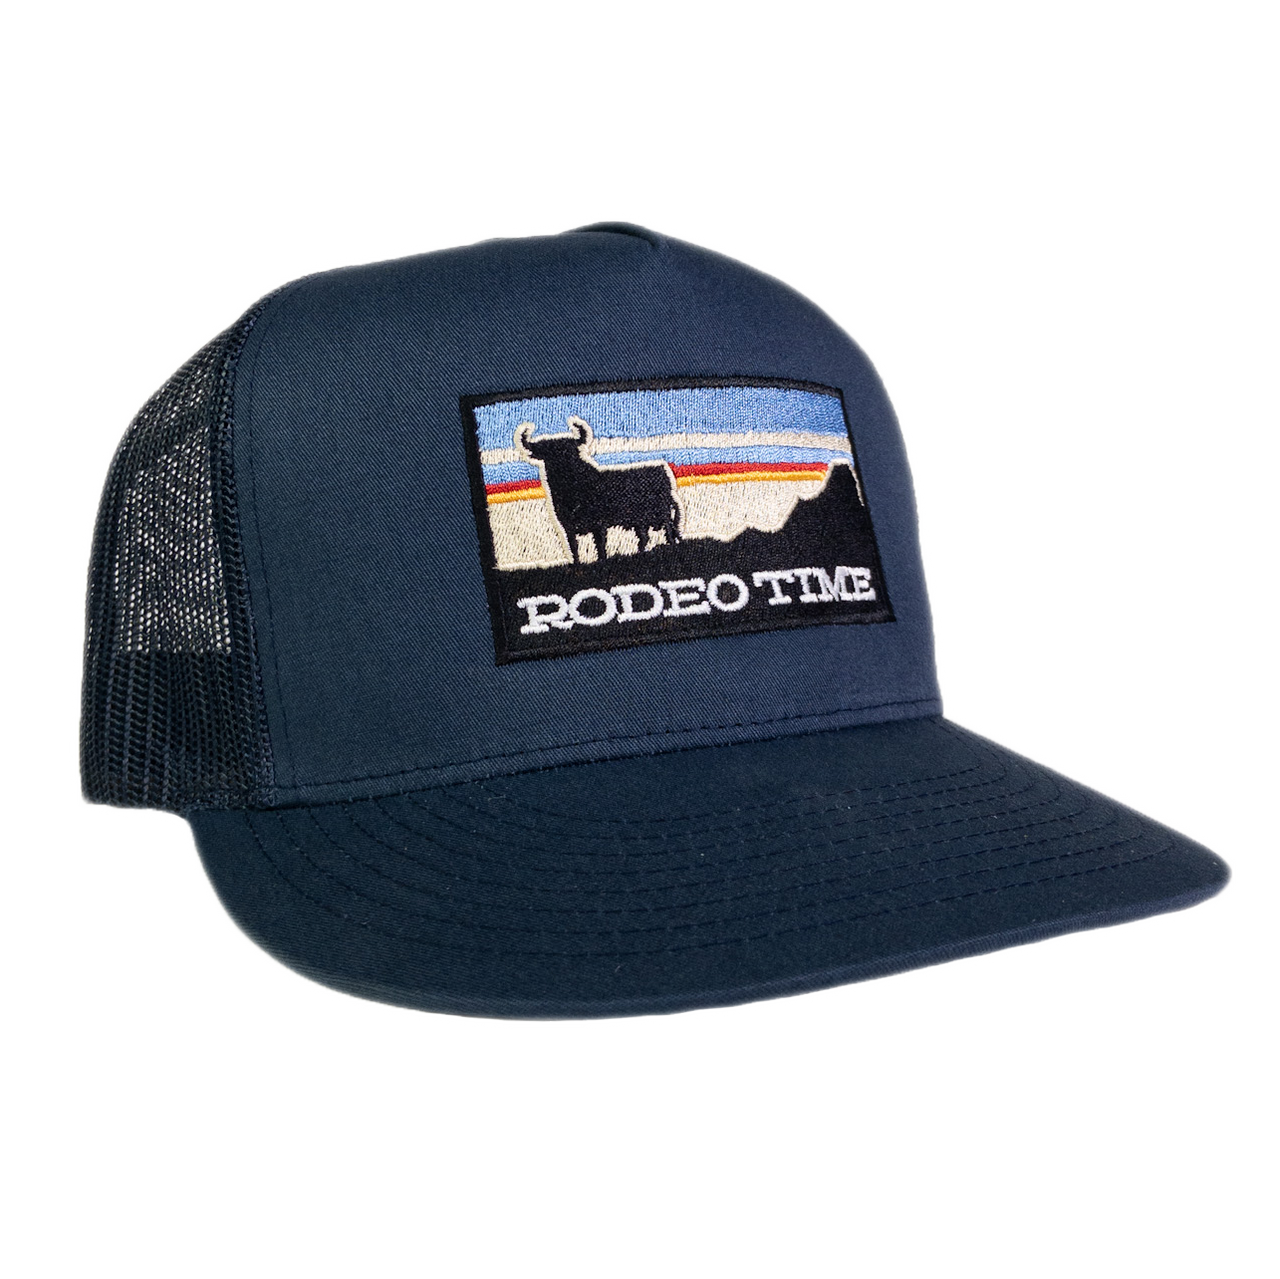 Rodeo Time Sunset Navy Meshback